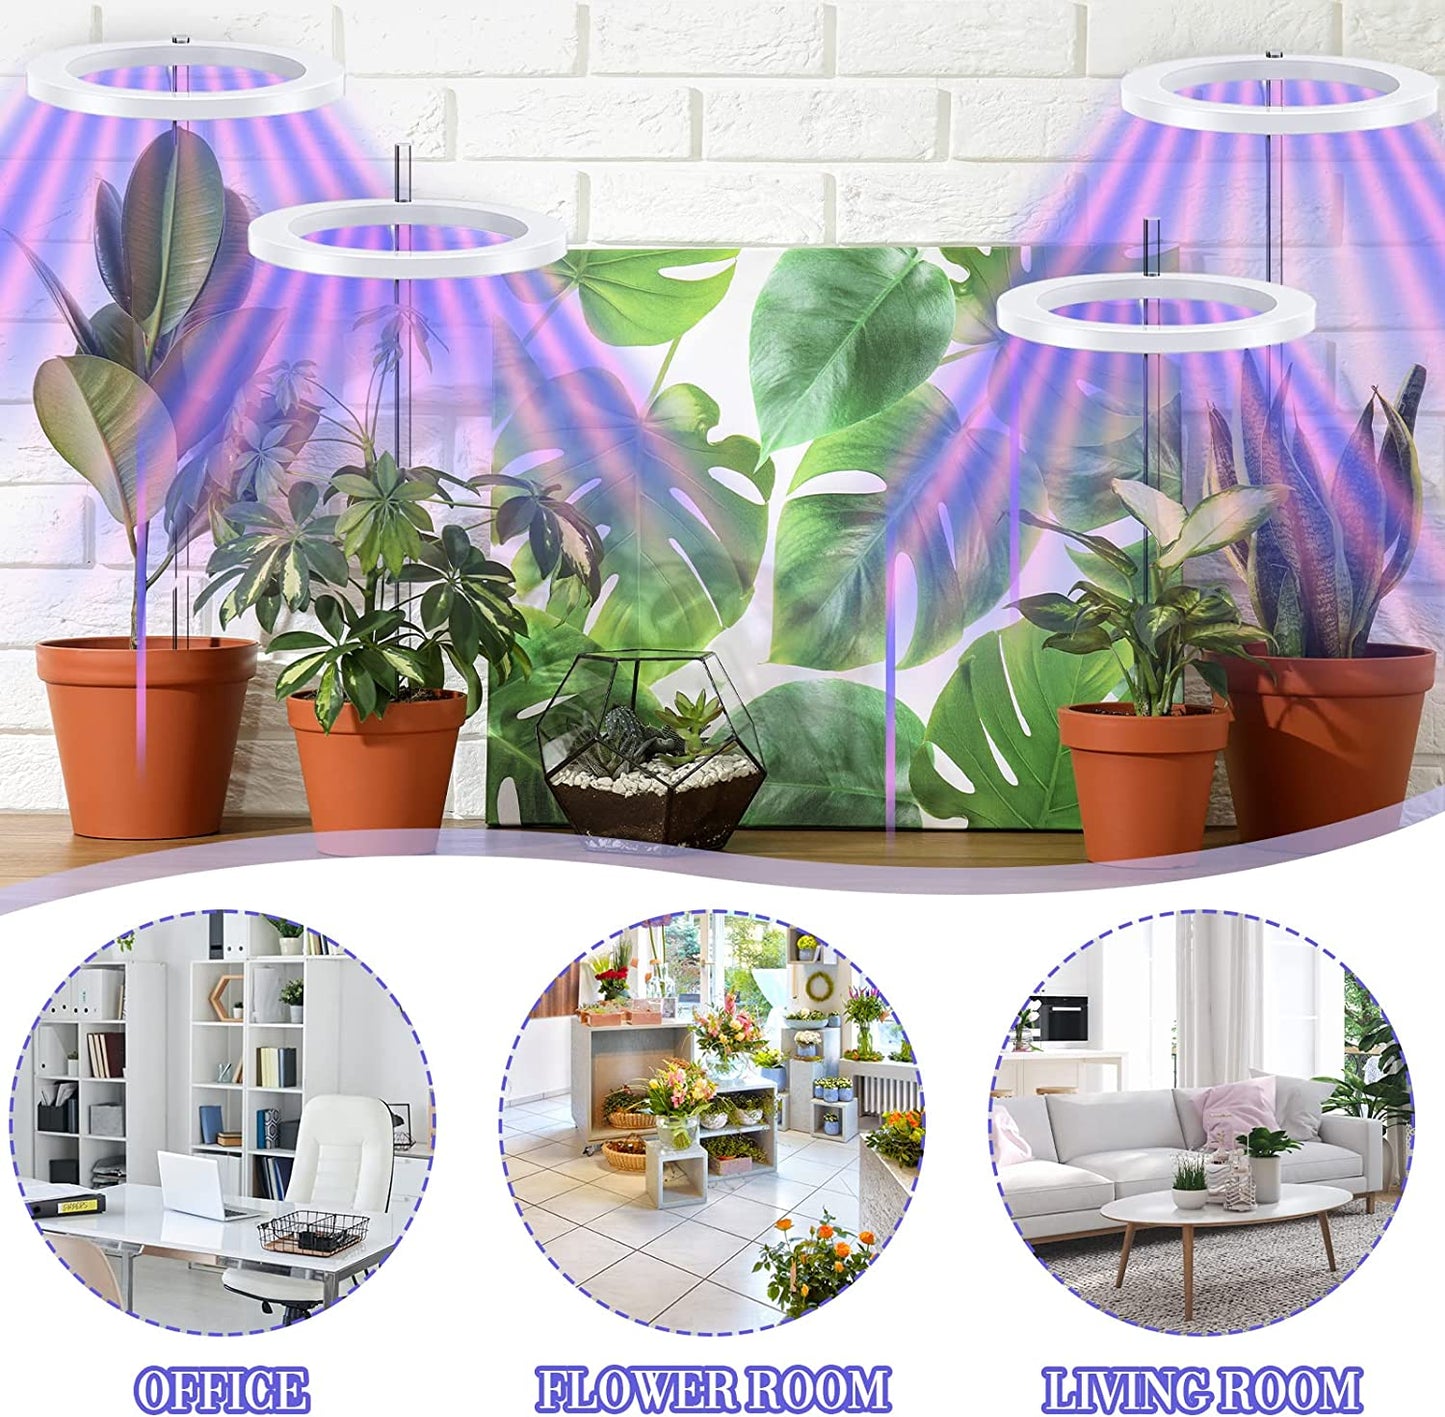 LED Grow Light for Indoor Plants 4 Heads Height Adjustable Plant Growing Lamp Plant Auto Timing Switch Annular Light, Idea for Small Plant Light Home Decoration